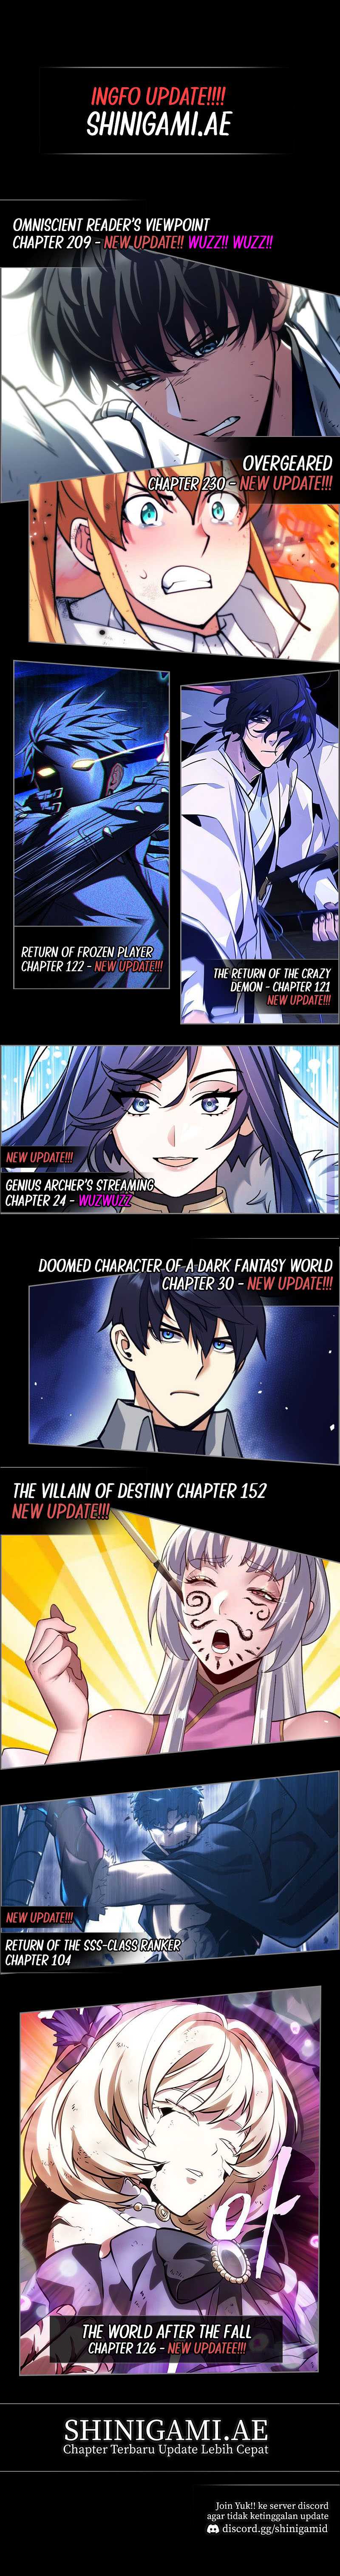 The Extra’s Academy Survival Guide Chapter 25